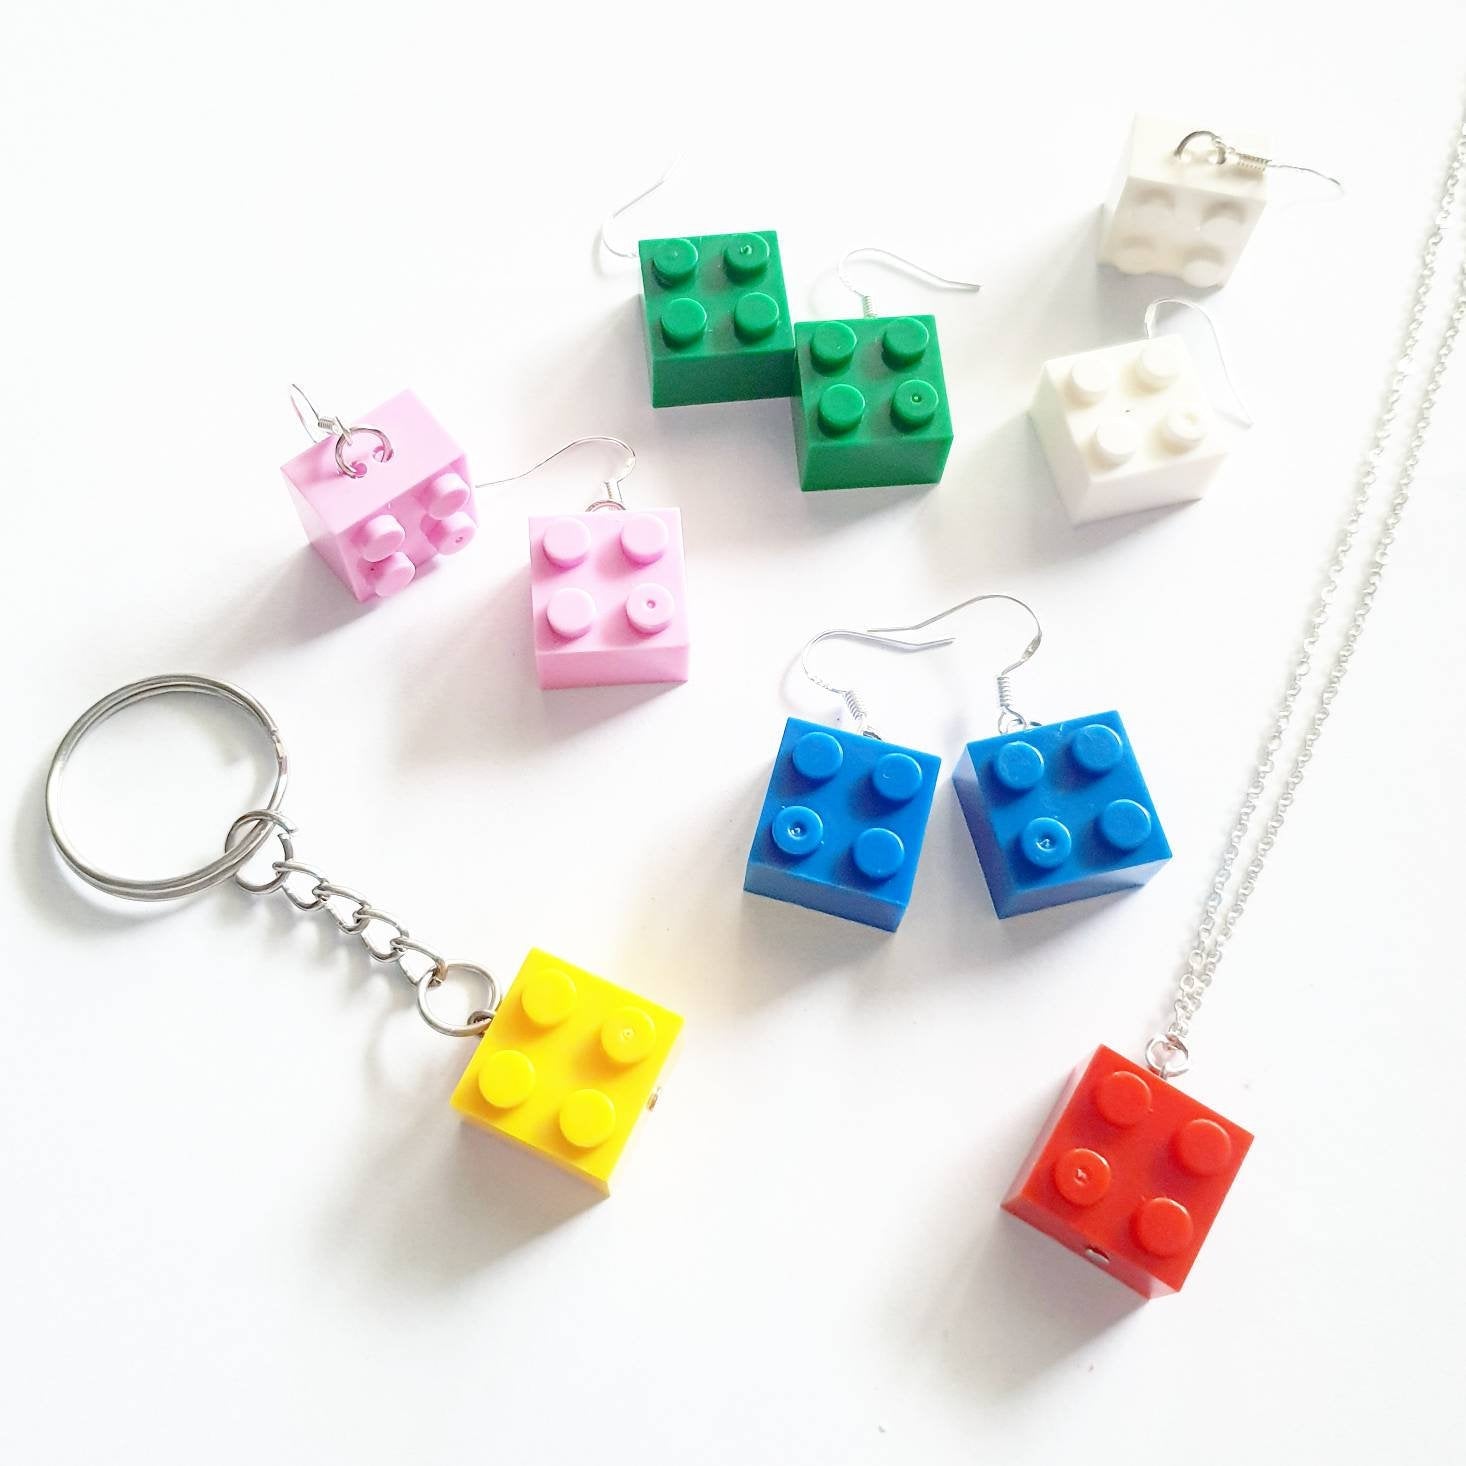 Building block Jewelry Earrings Necklace Keychain Collar Pins Charm Car Bracelet Anklet Keyring Choker Jewellery Alternative Quirky Alt